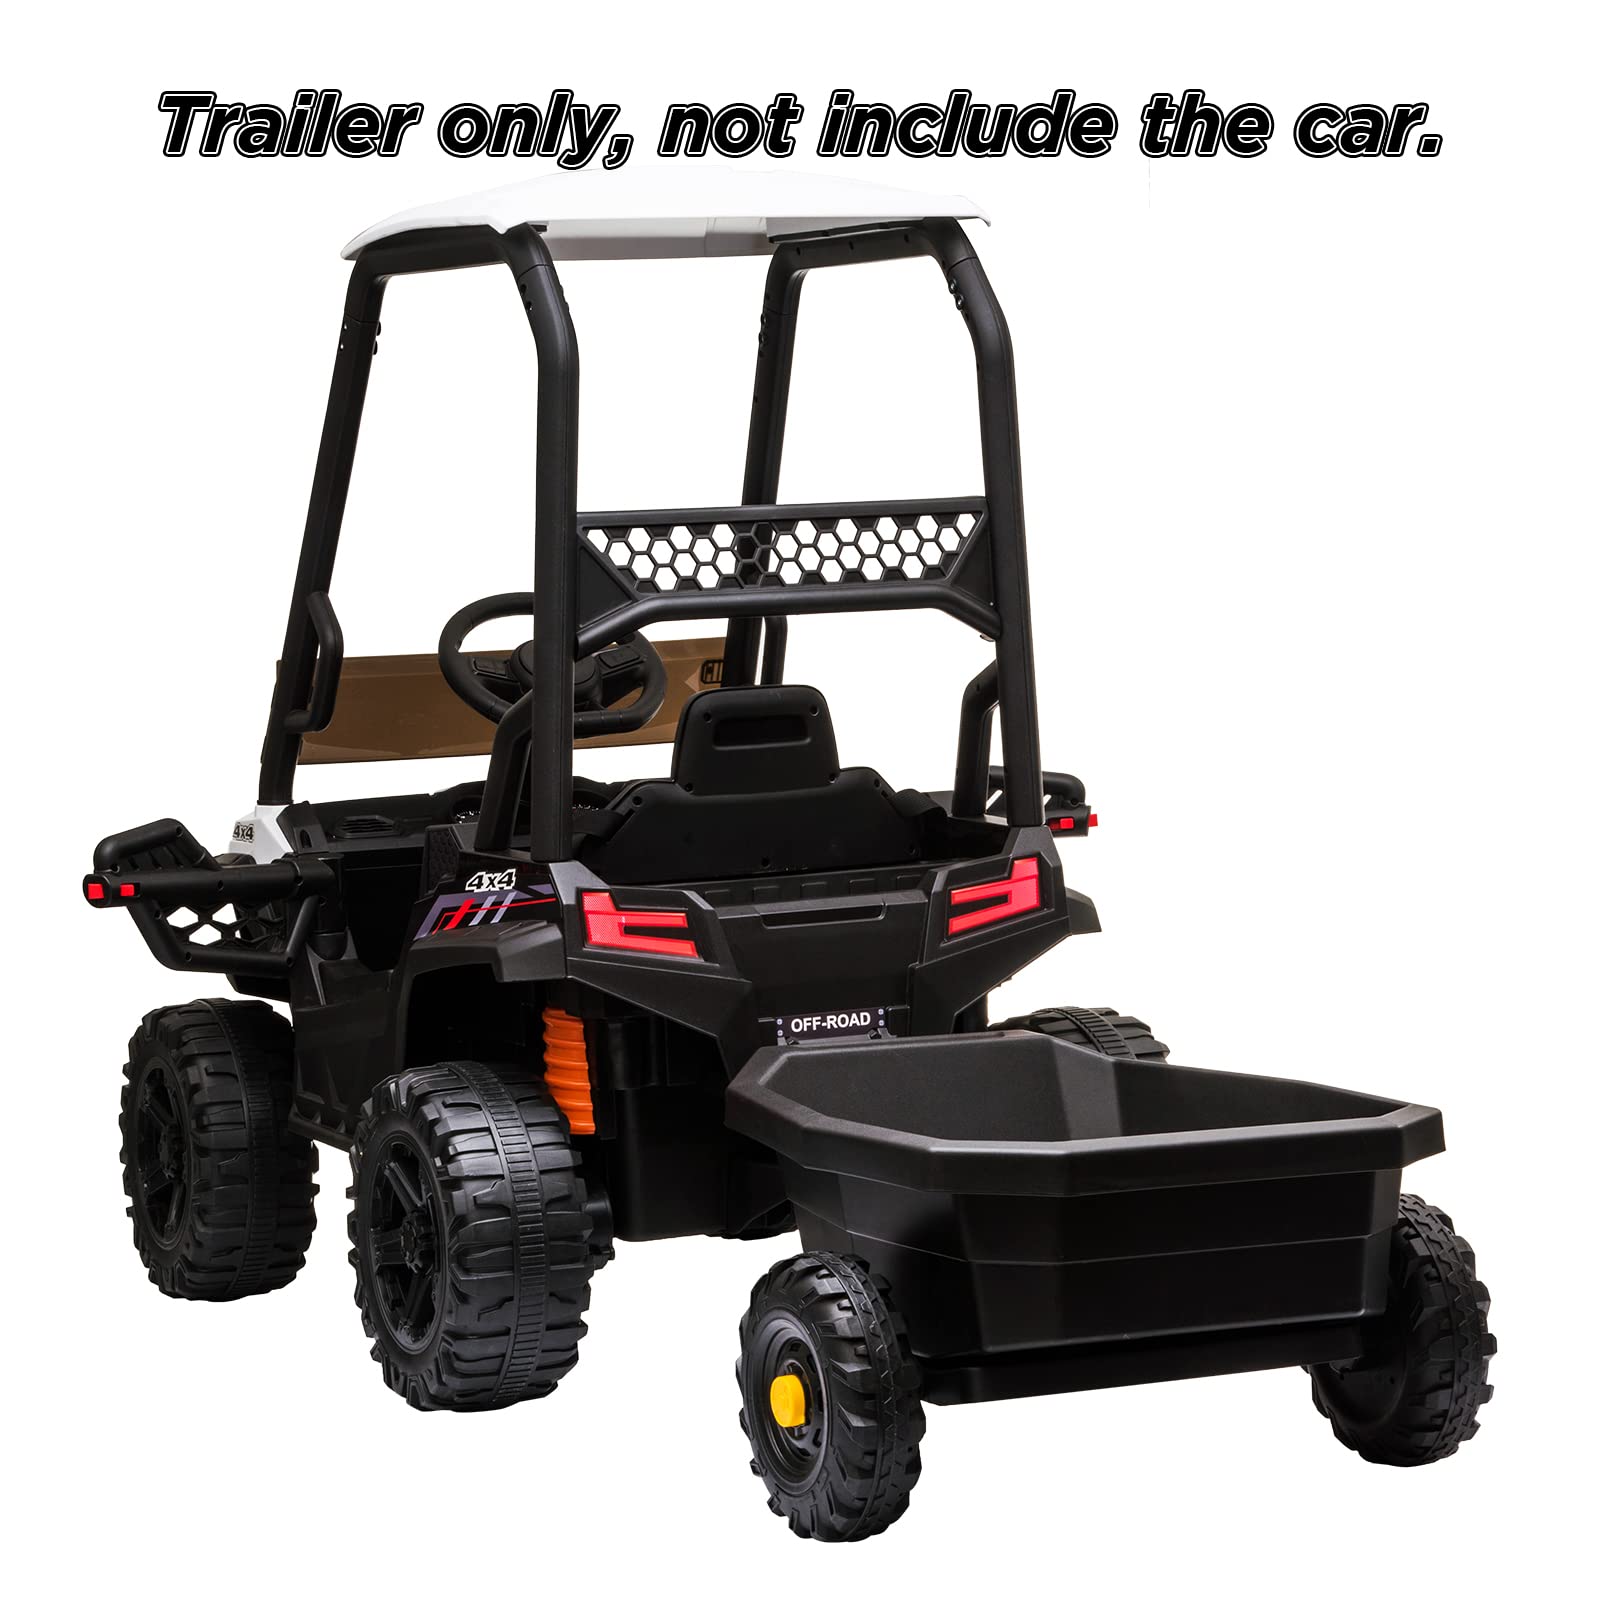 Trailer for Kids Ride On Car UTV, with Spring Suspension LED Lights AUX Port Music USB for 3-8 Years Old Boys Girls (Trailer Only)